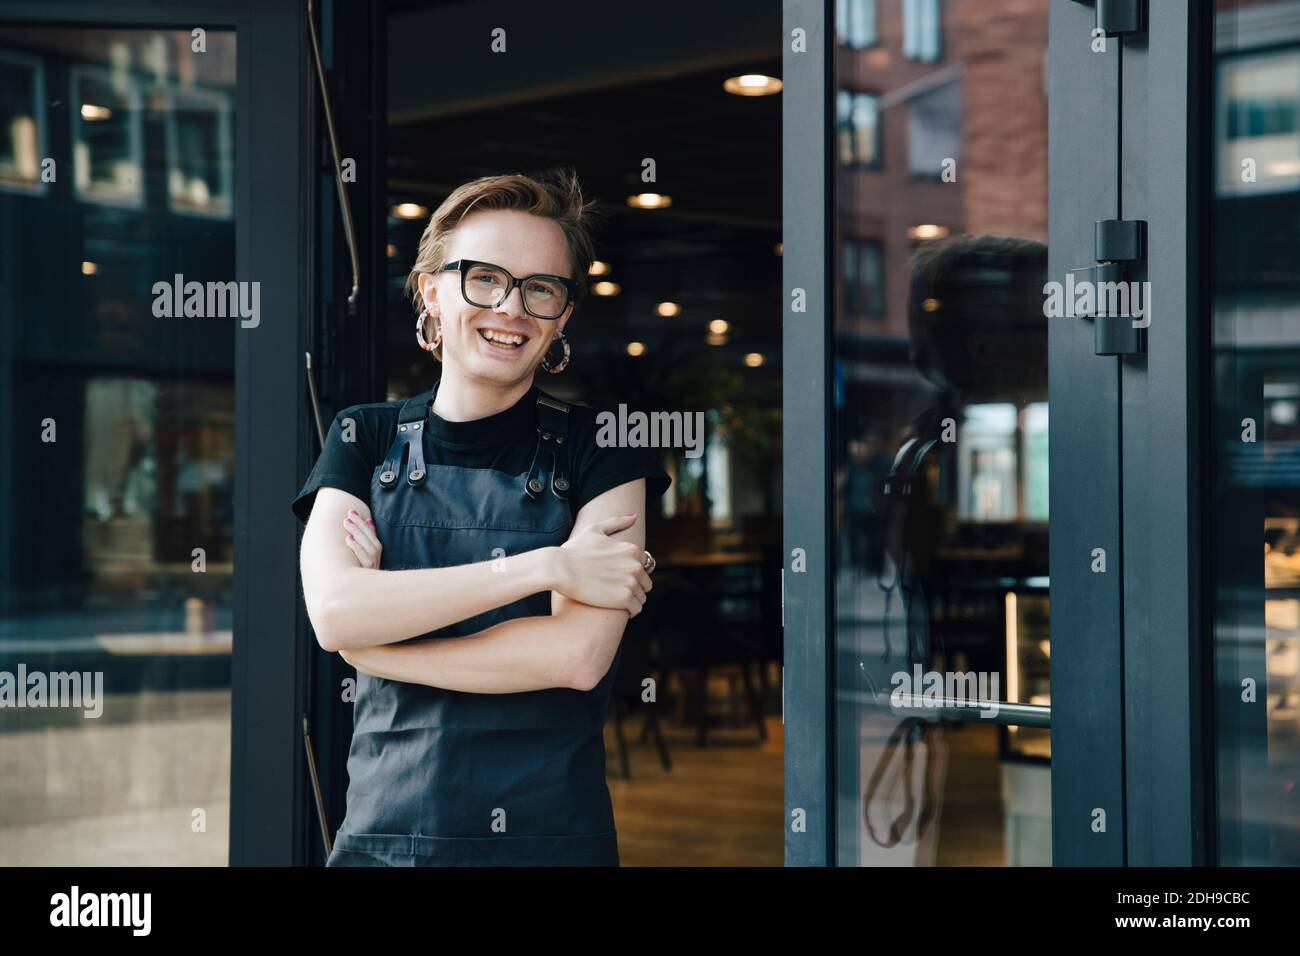 Portrait of smiling androgynous owner standing with arms crossed at coffee shop entrance Stock Photo